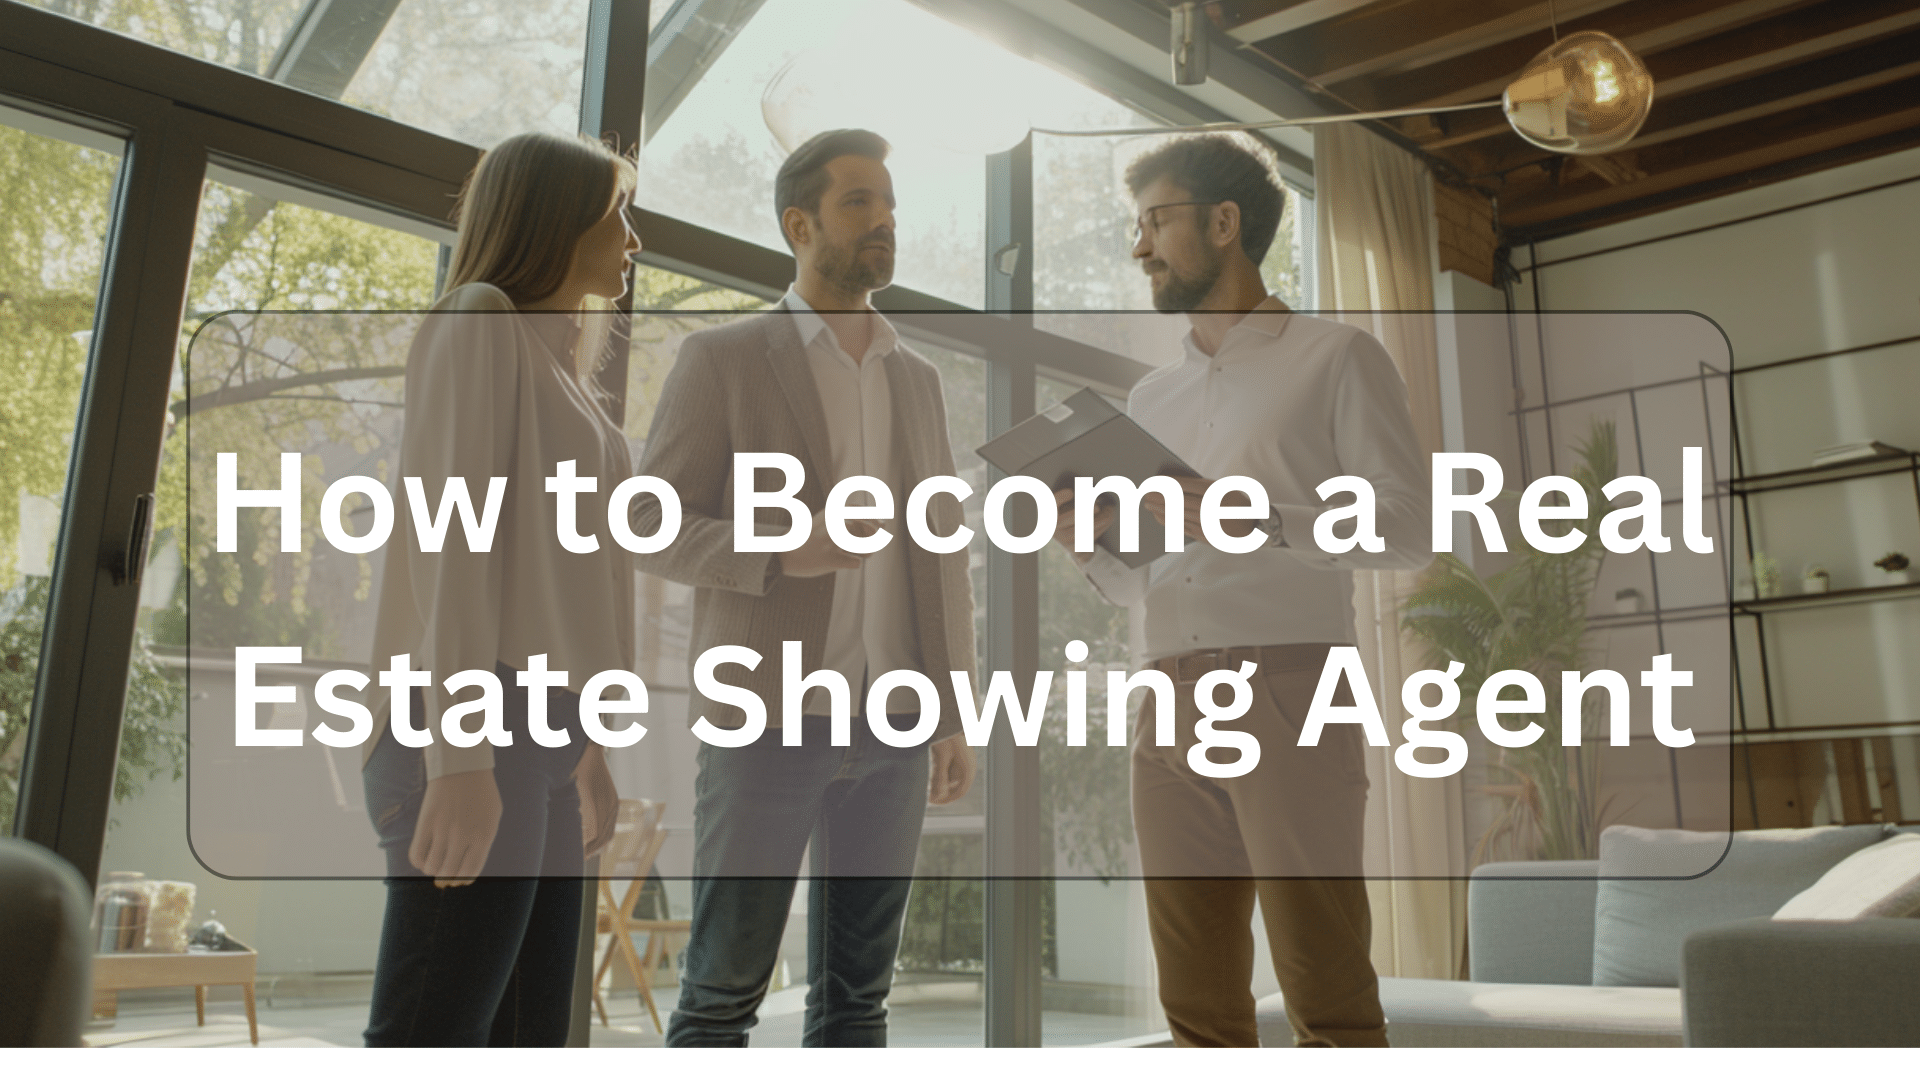 how to become a real estate showing agent illustration